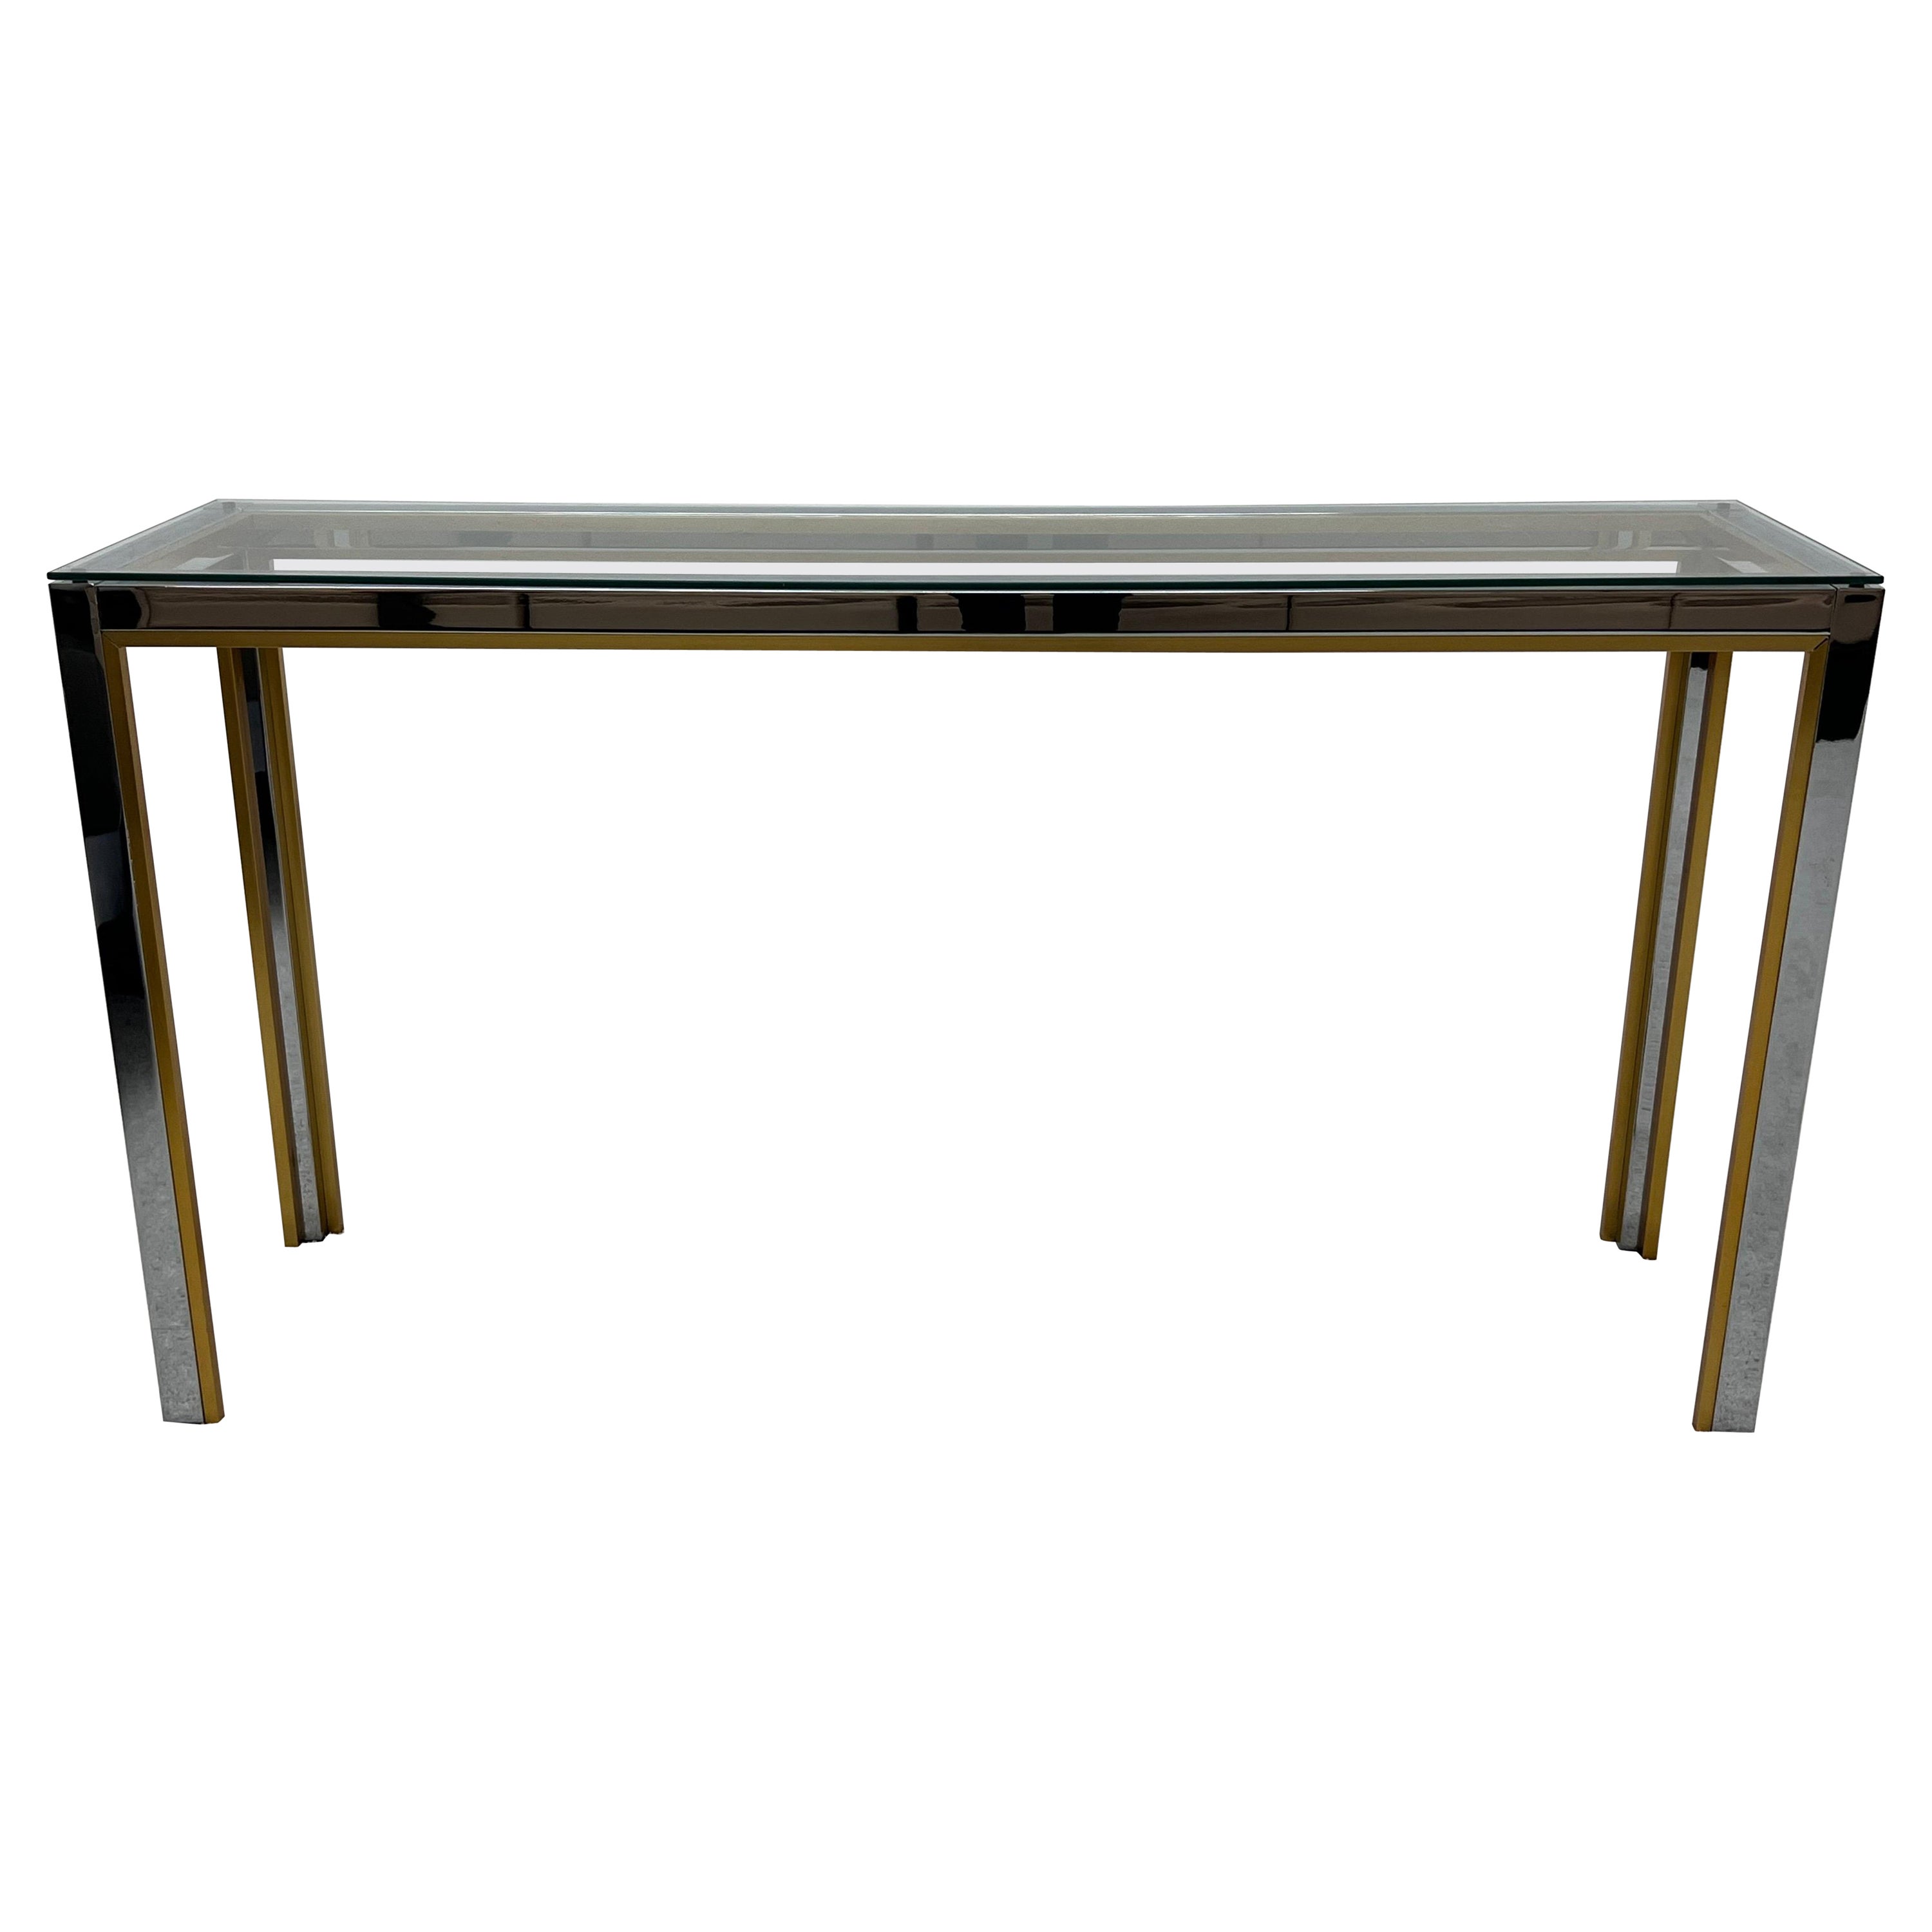 Mid-Century Chrome and Glass Console Table After Romeo Rega, Italy